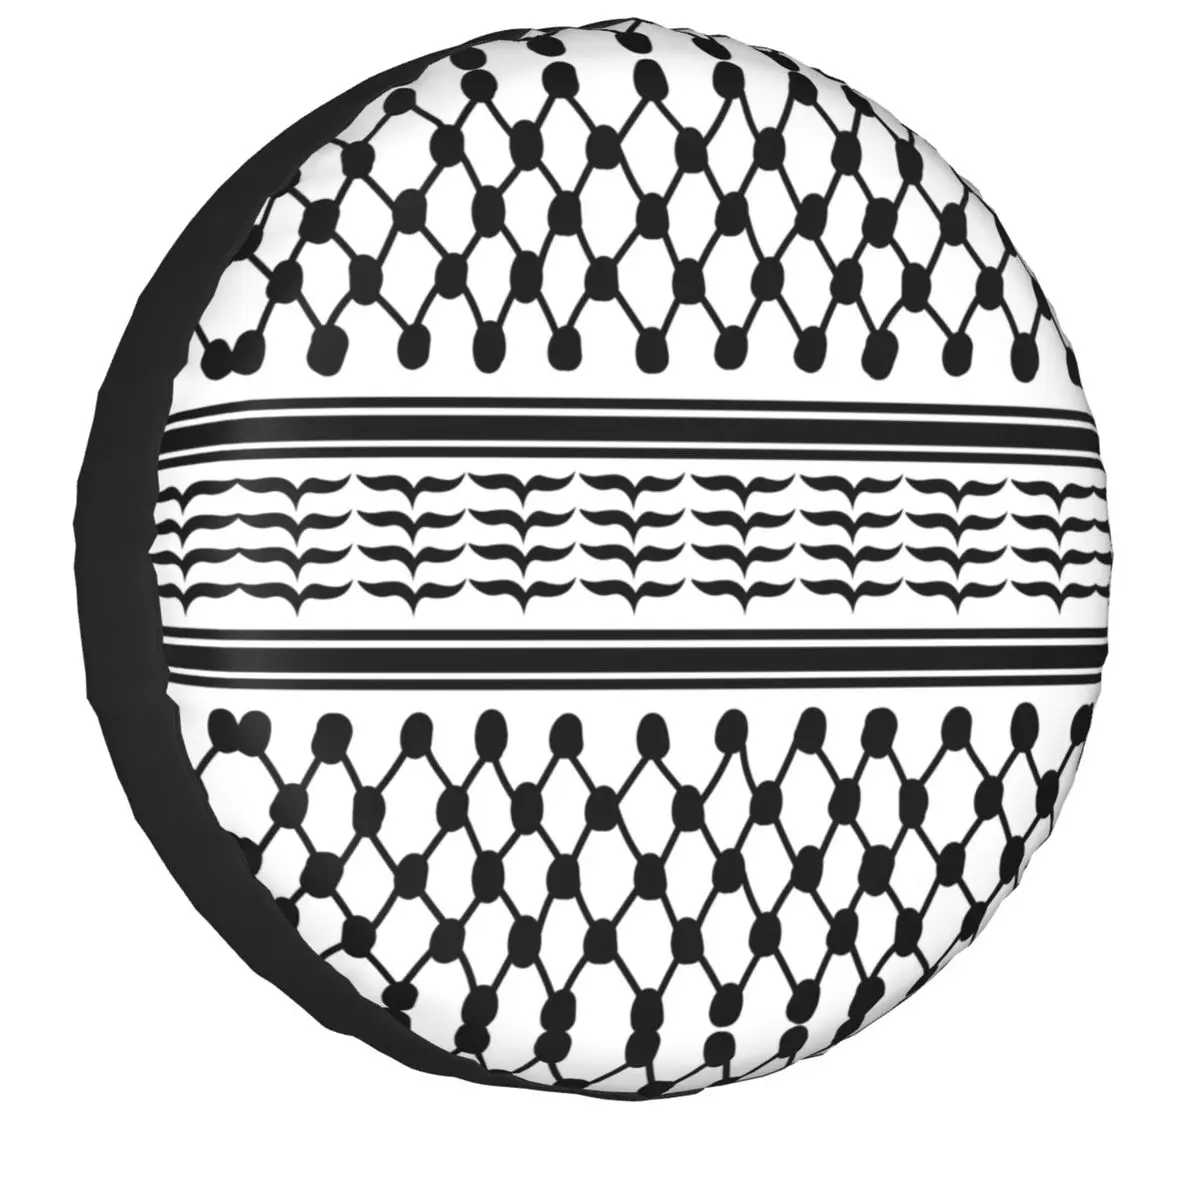 

Palestinian Kufeya Spare Wheel Cover For Jeep Trailer Custom Palestine Keffiyeh Embroidery Tire Protector 14-17 Inch